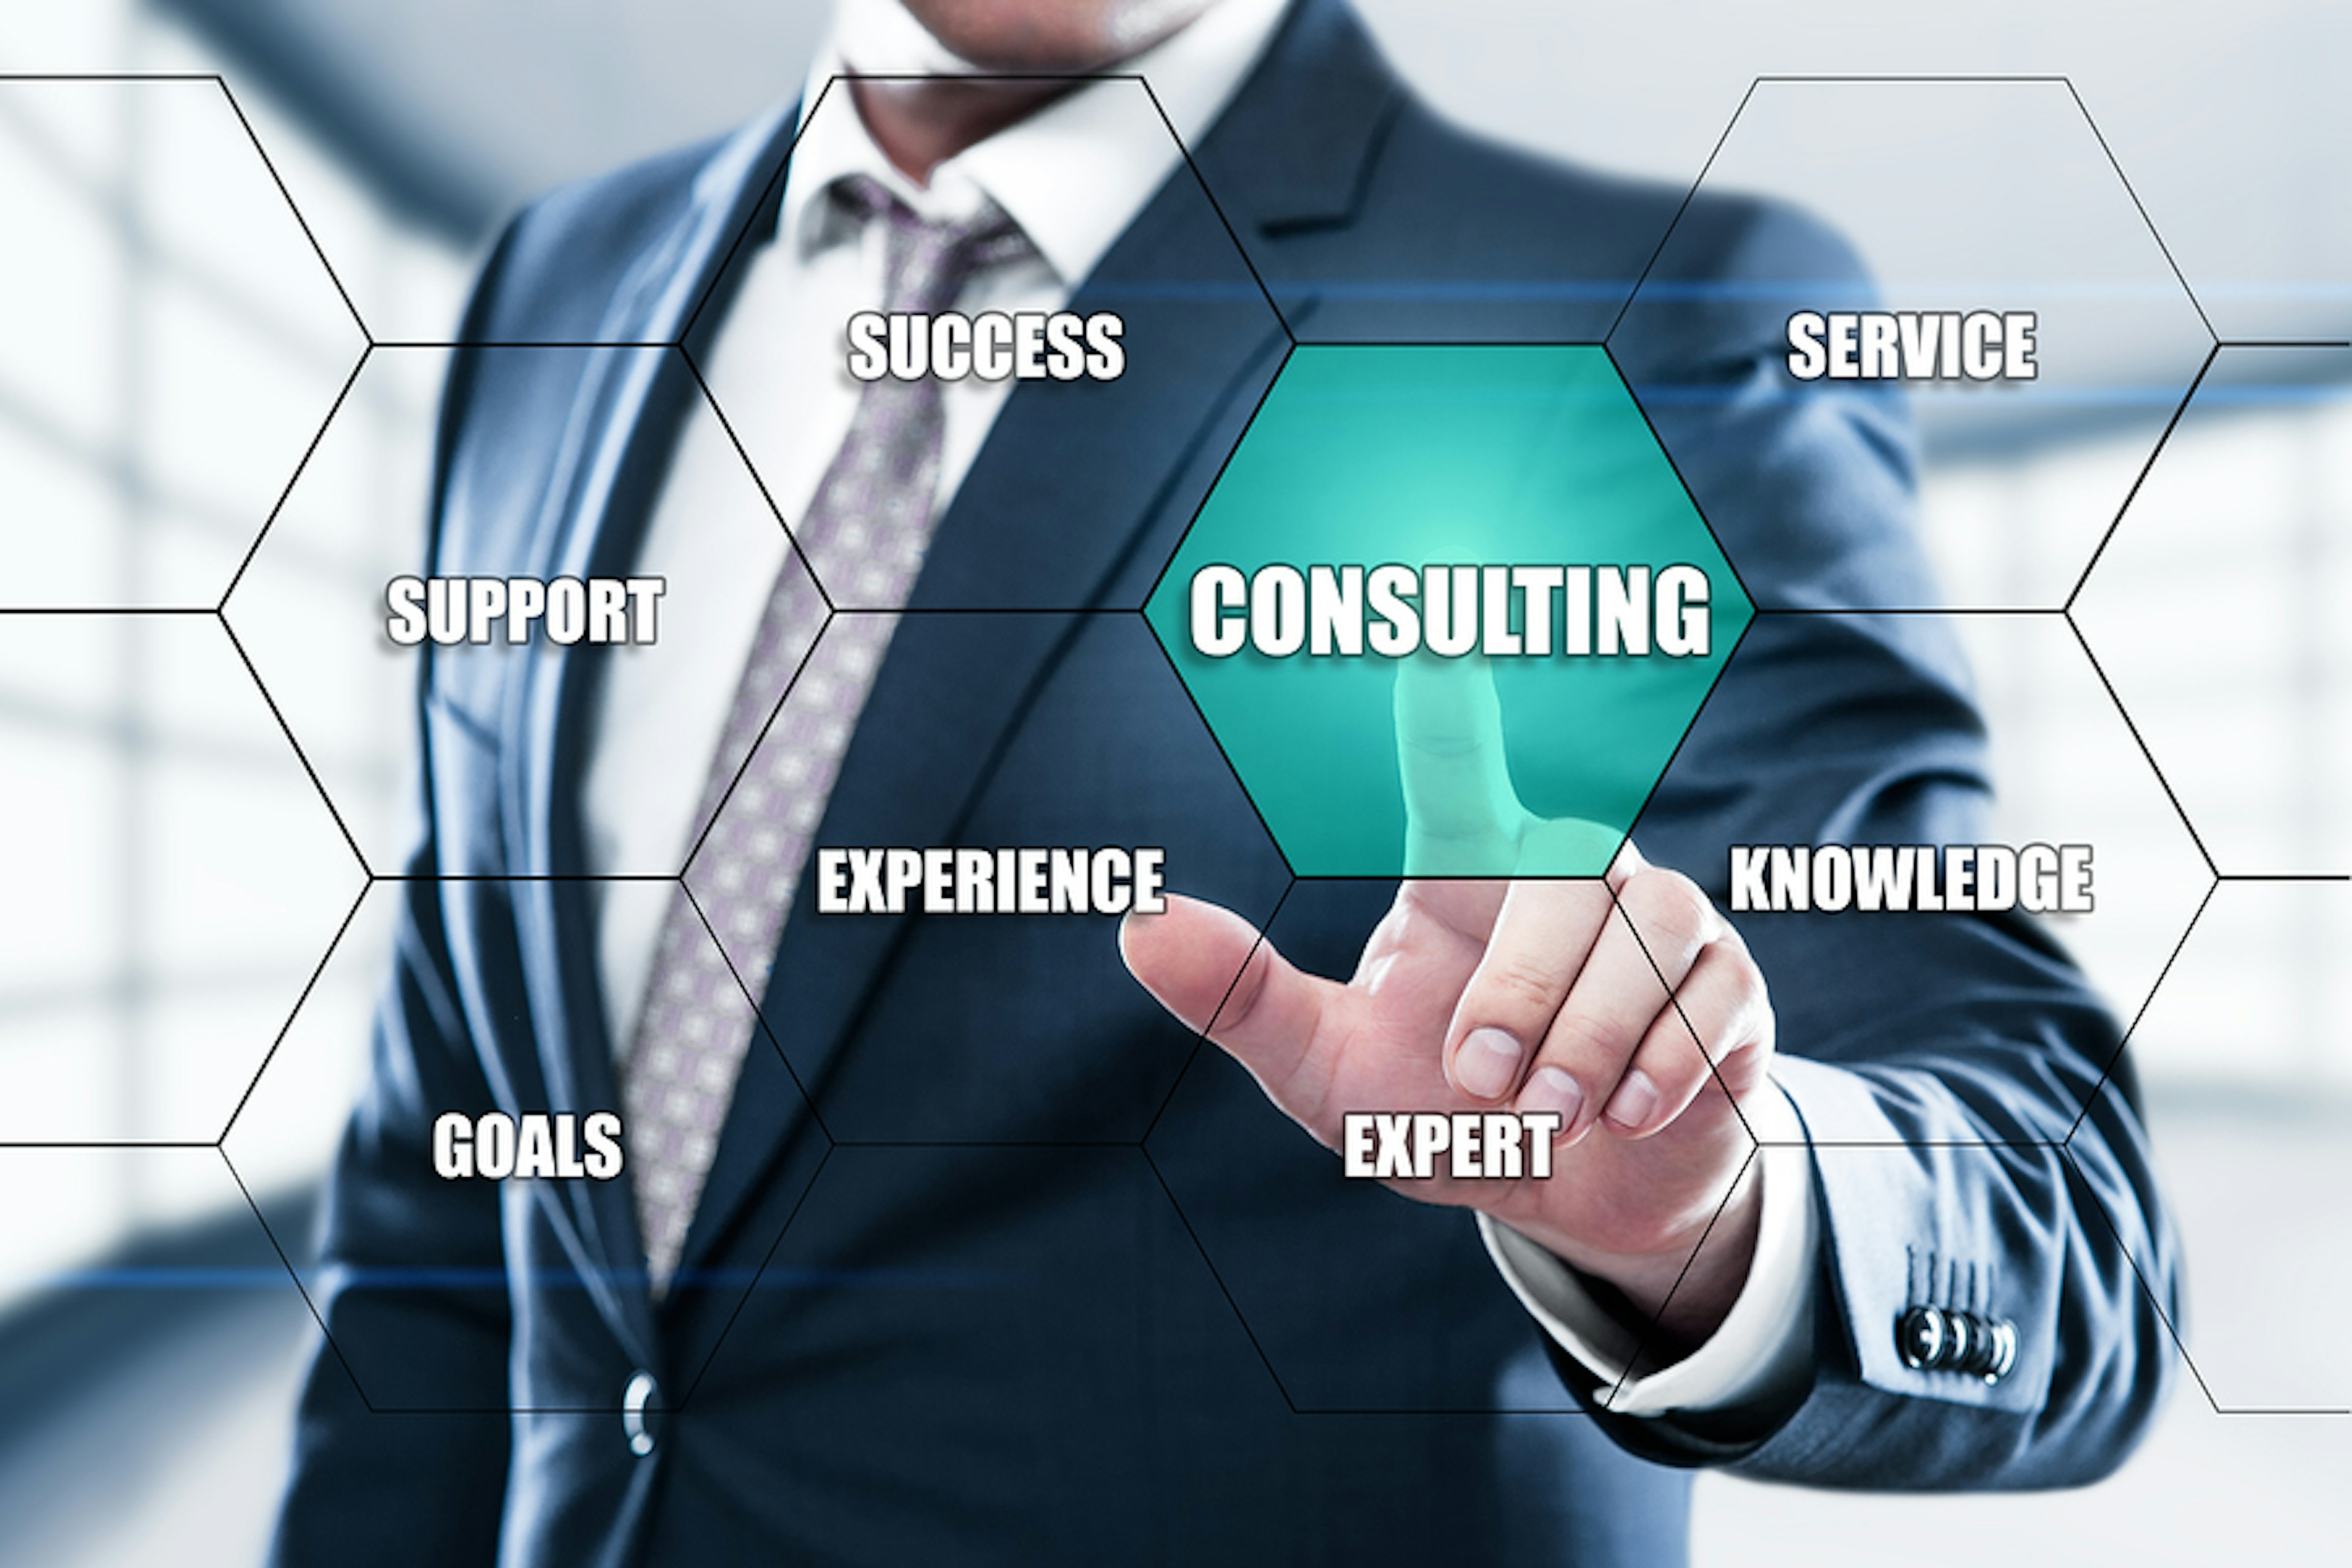 How to Promote Your Consulting Business Online